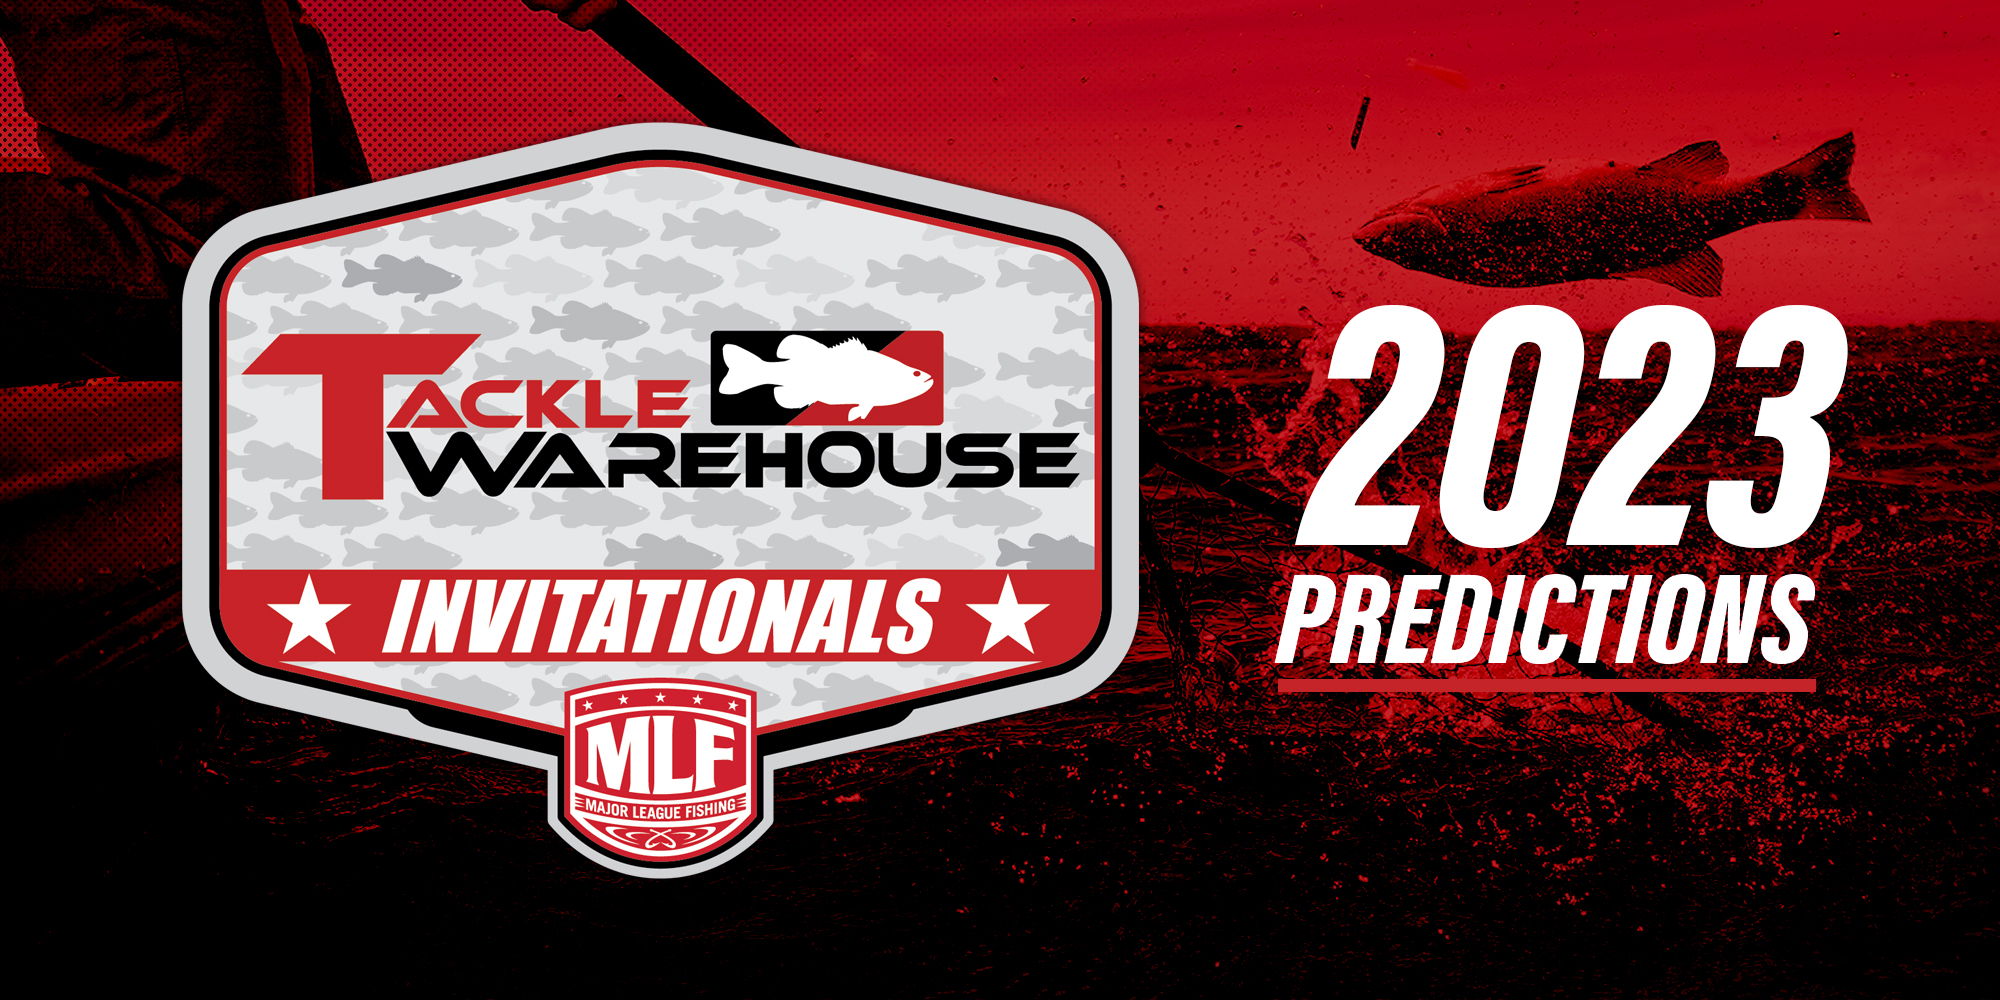 Fearless predictions for the 2023 Tackle Warehouse Invitationals